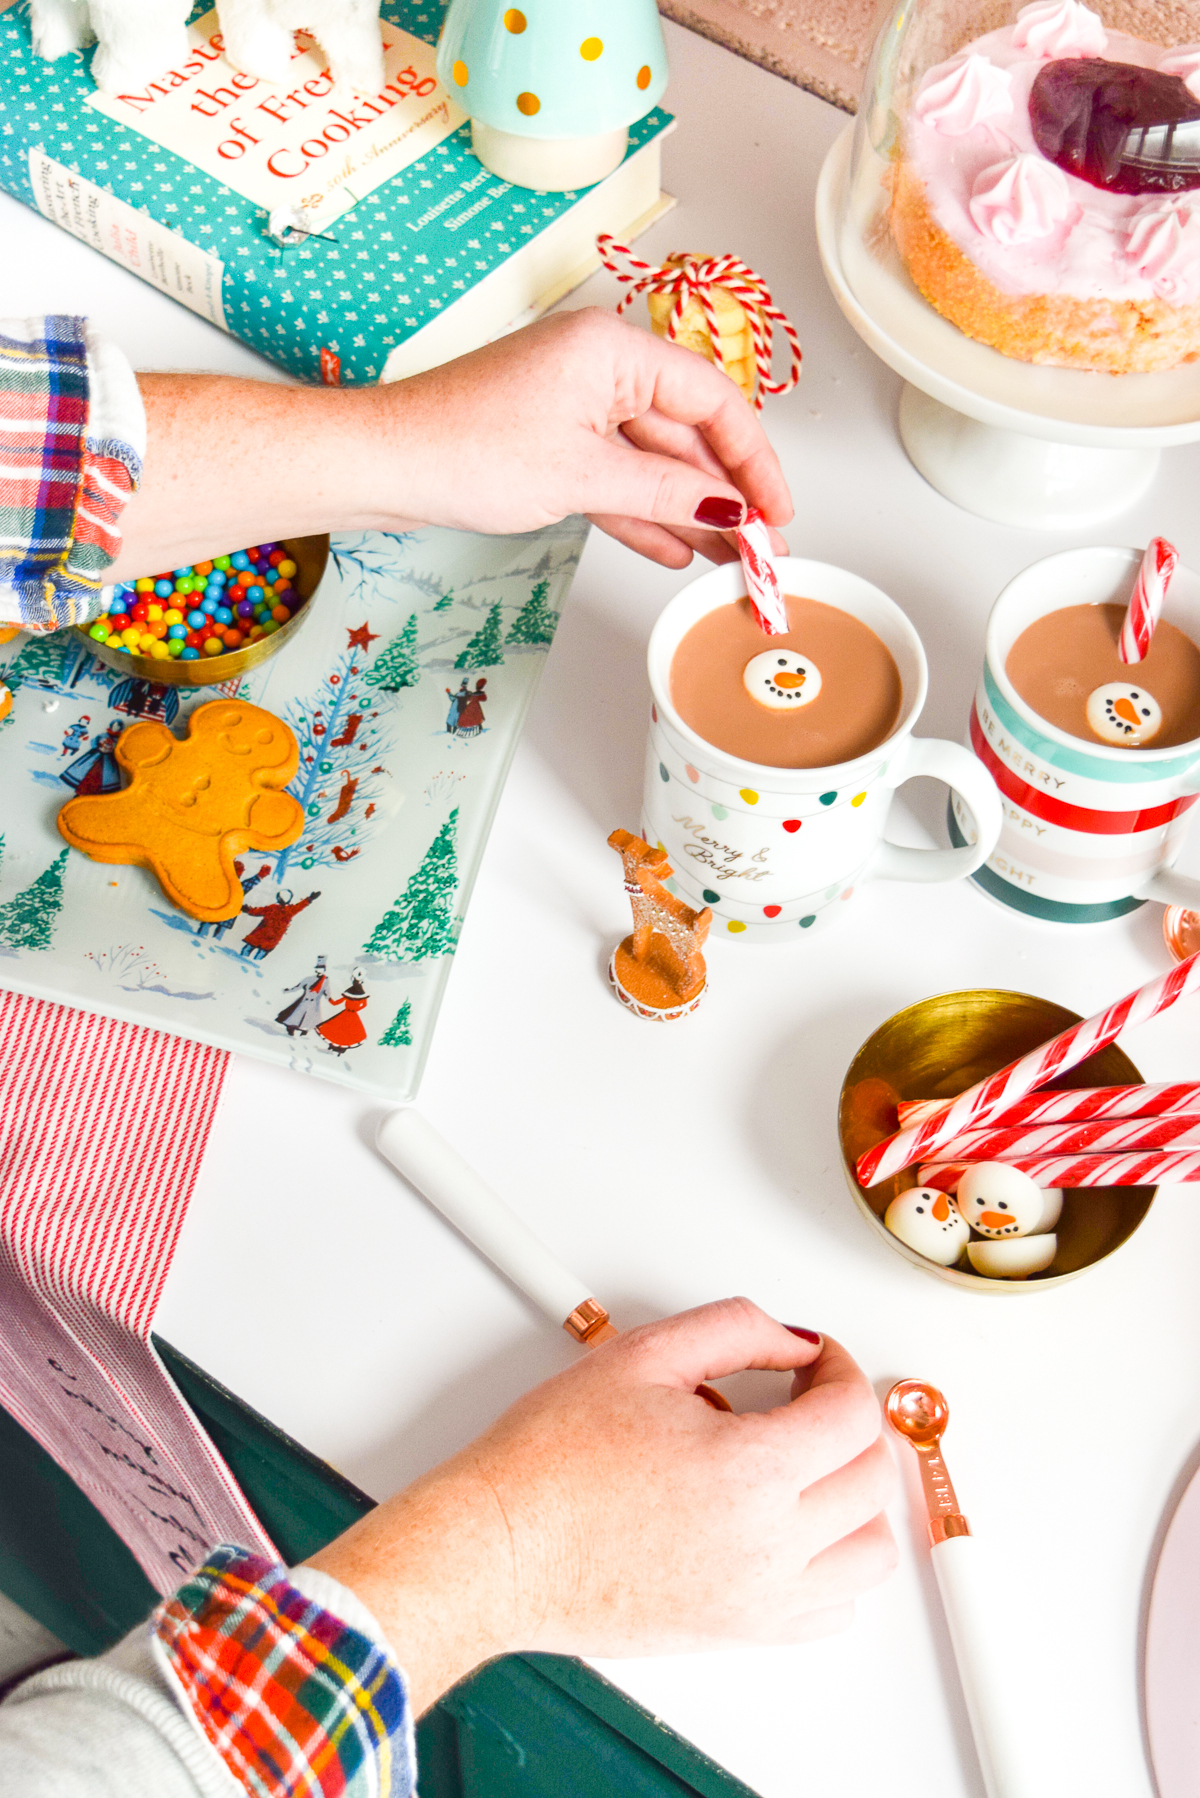 It happens EVERY year - your coworkers want to come by for a drink after work, your friend stops by for coffee (and a chit chat) unexpectedly, and you get roped into a cookie exchange of some kind. With a bit of planning, you can be ready for all 3 of those holiday entertaining scenarios - all you need is a trip to Homesense!